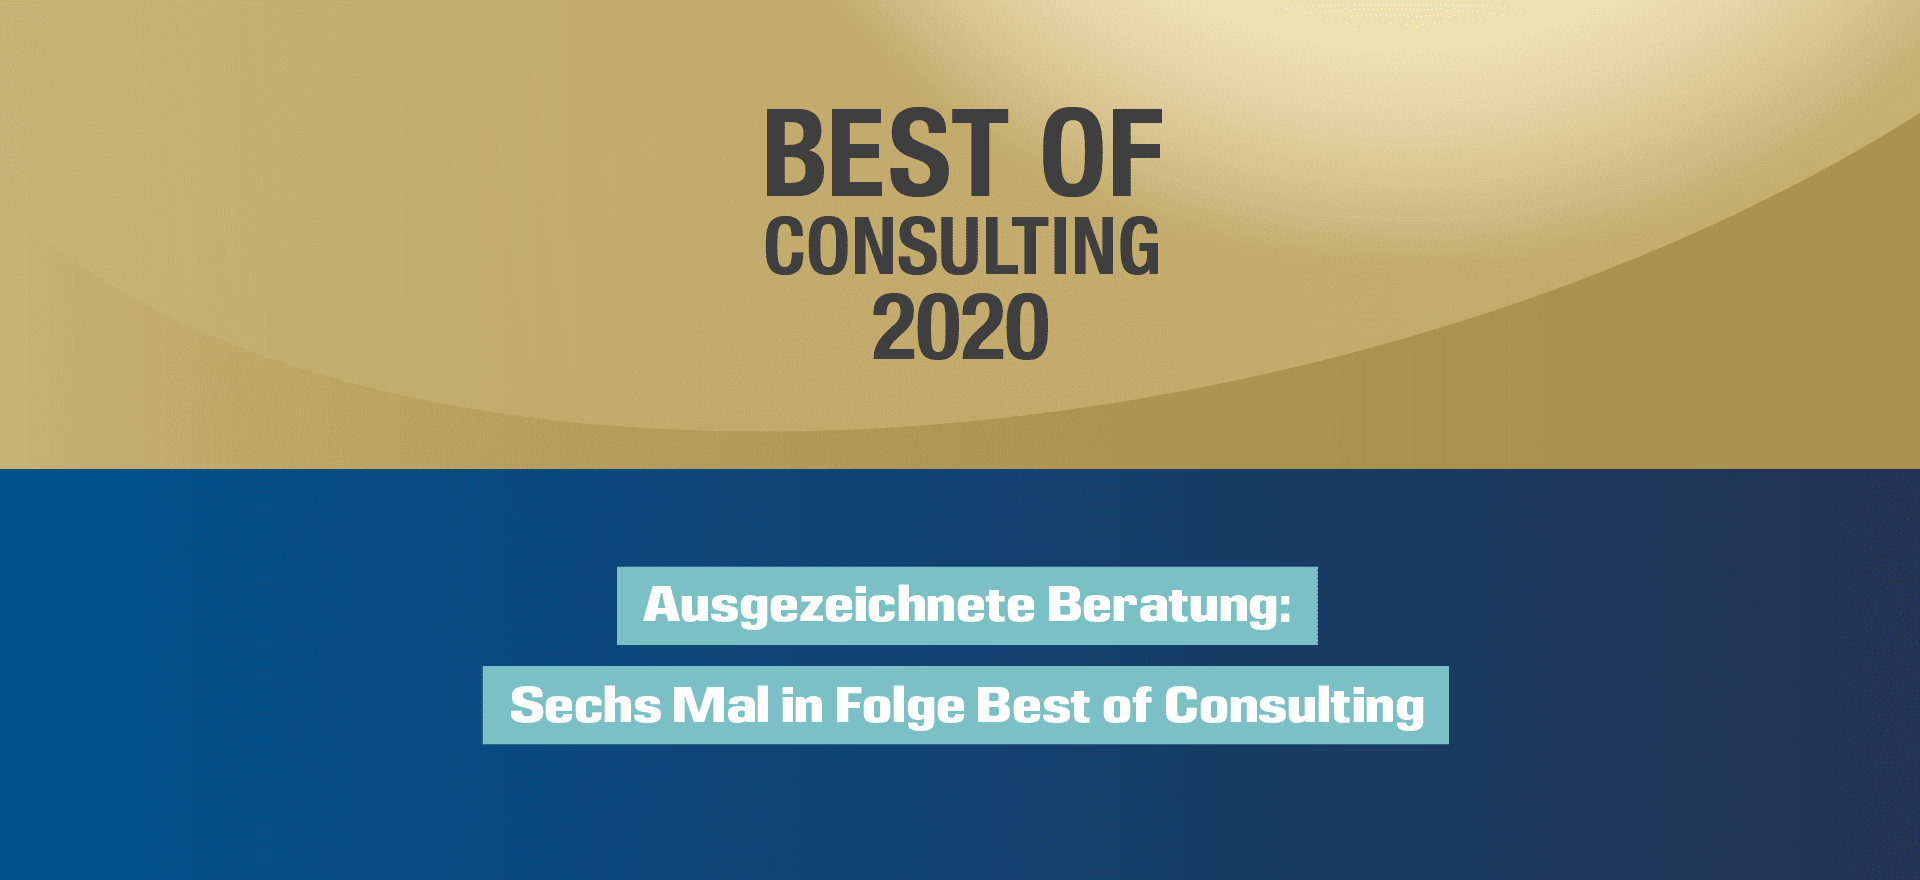 Best of Consulting 2020